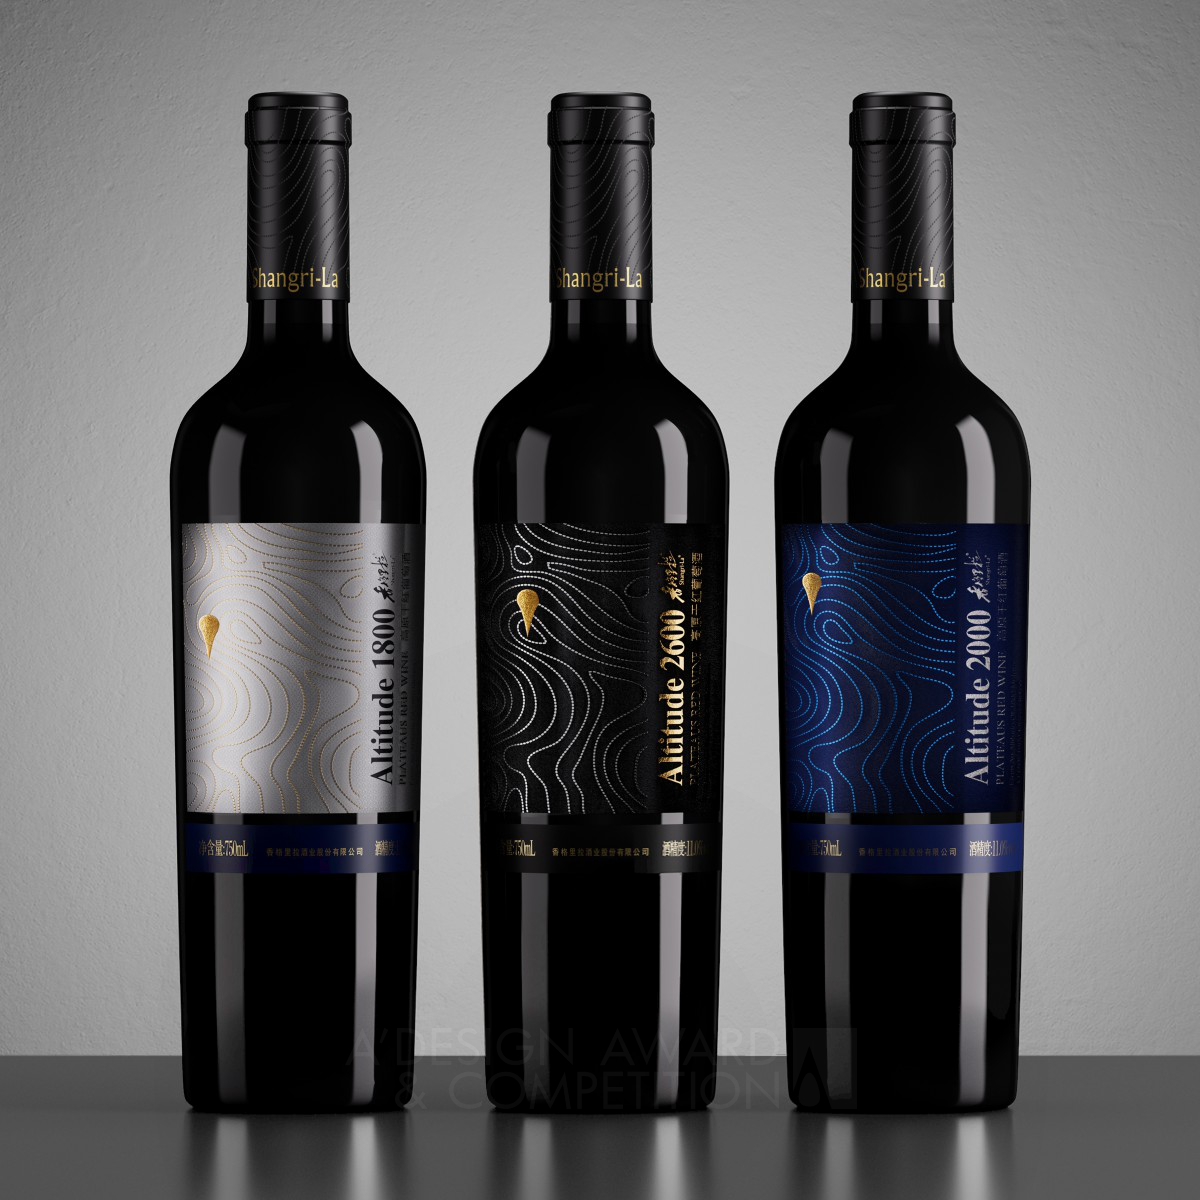 Pufine Creative wins Silver at the prestigious A' Packaging Design Award with Altitude Series Wine Label.